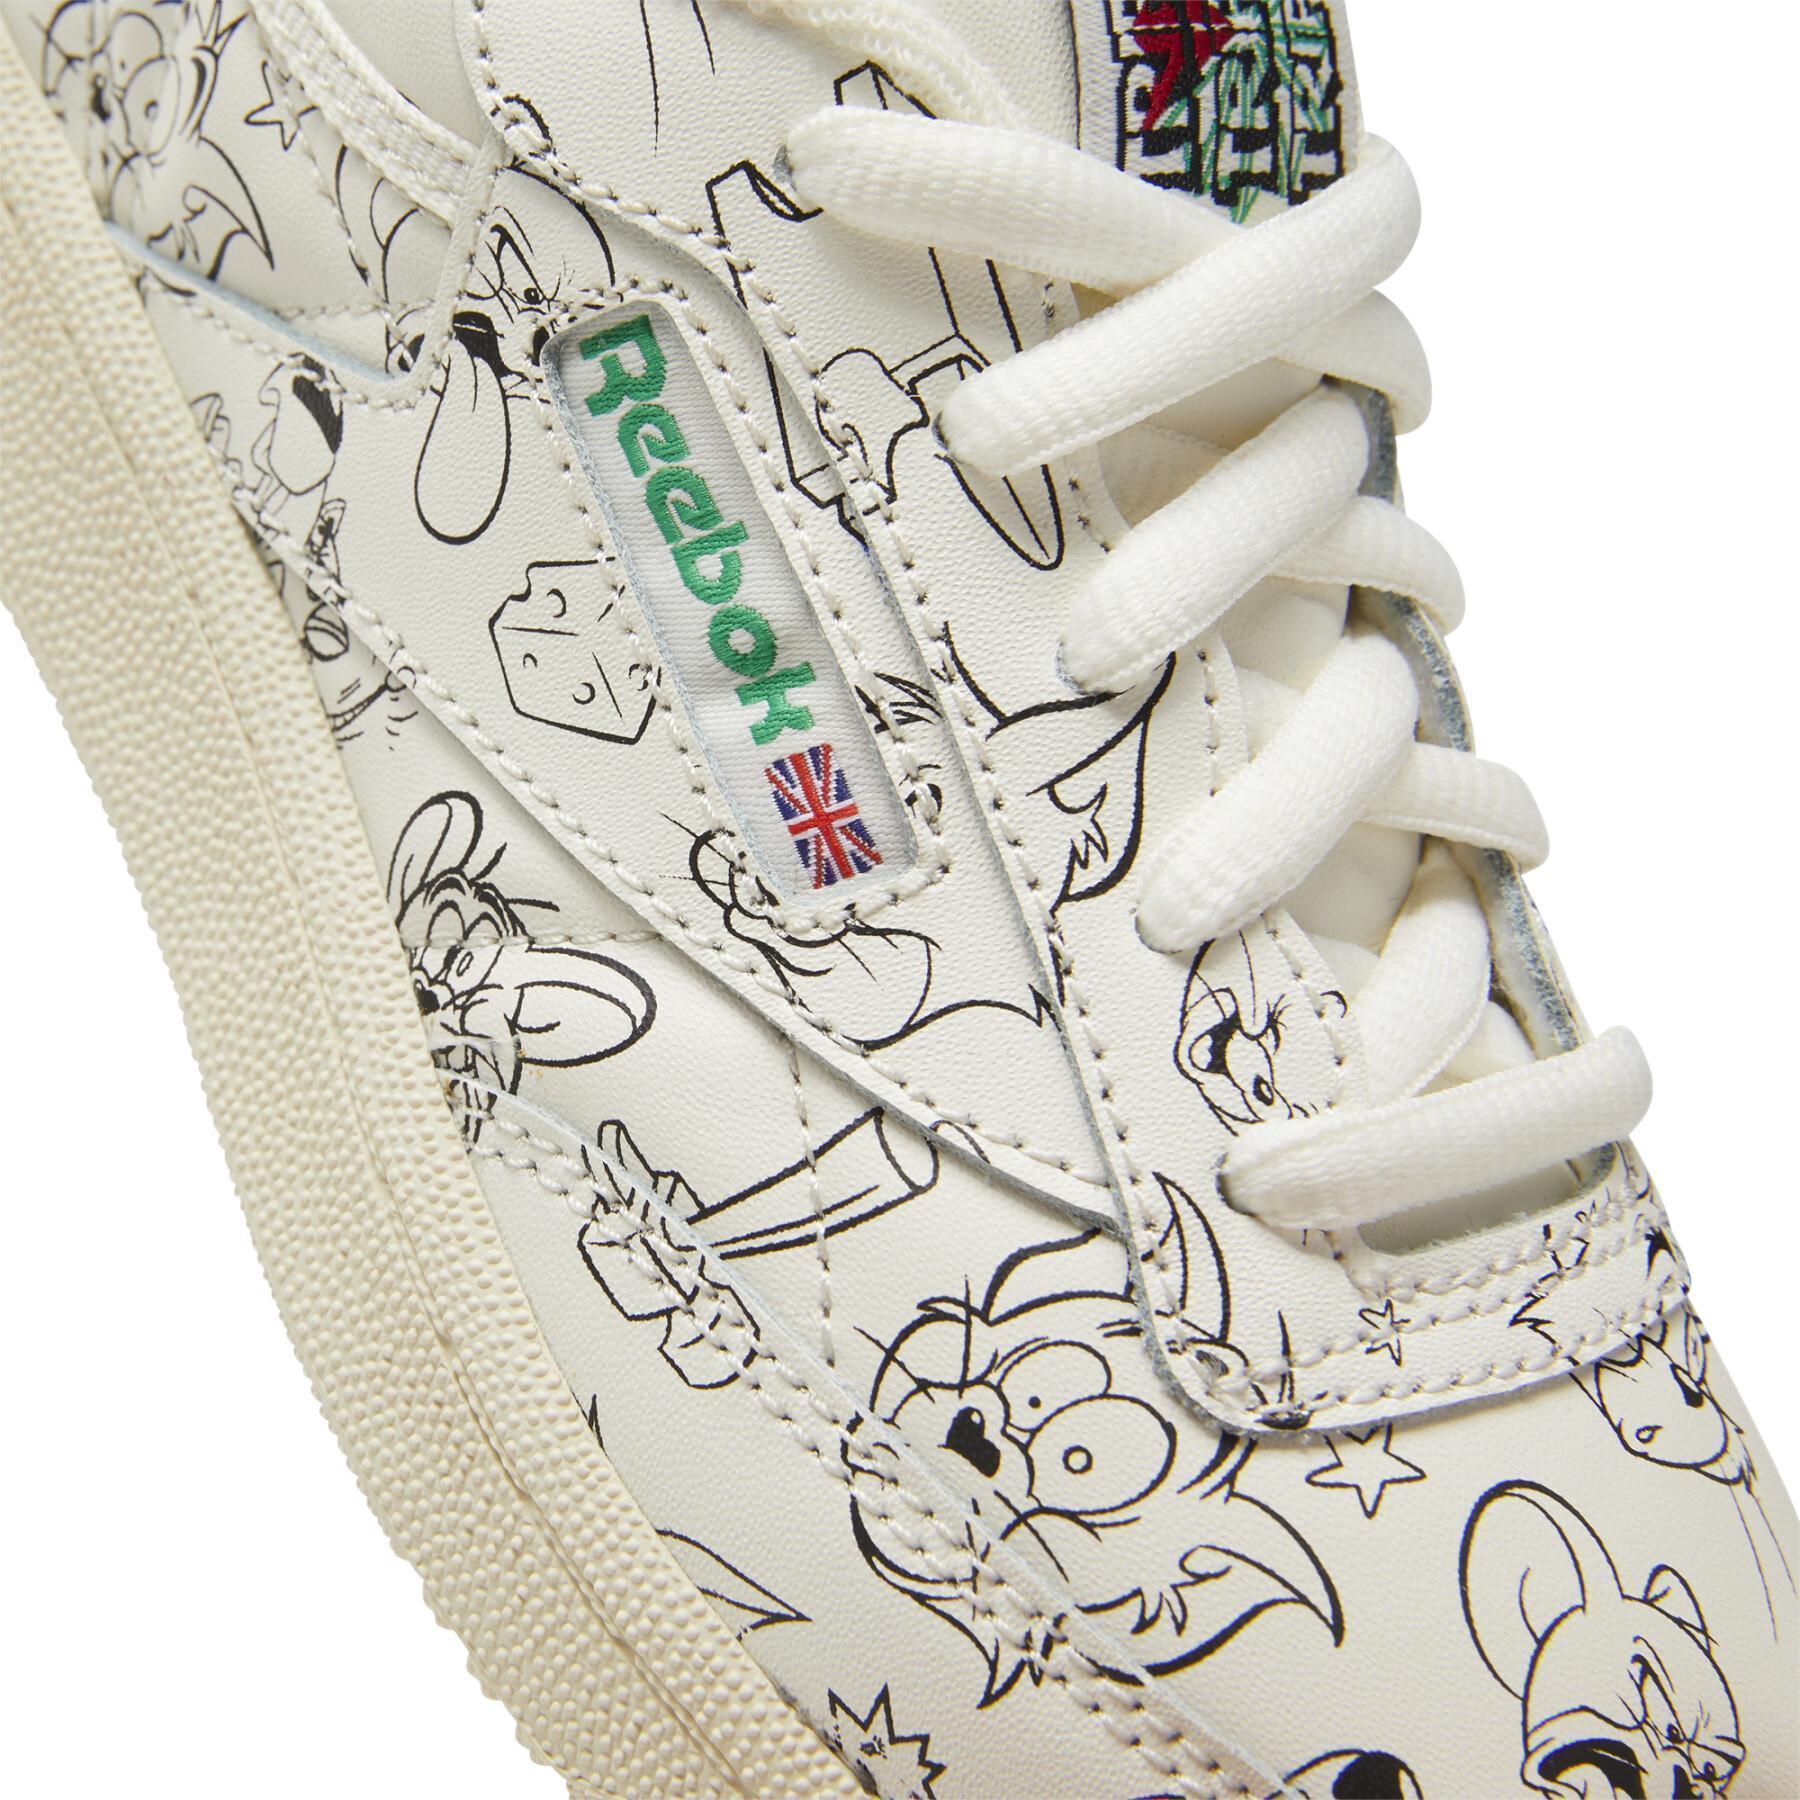 Children's shoes Reebok Classics Tom and Jerry Club C 85